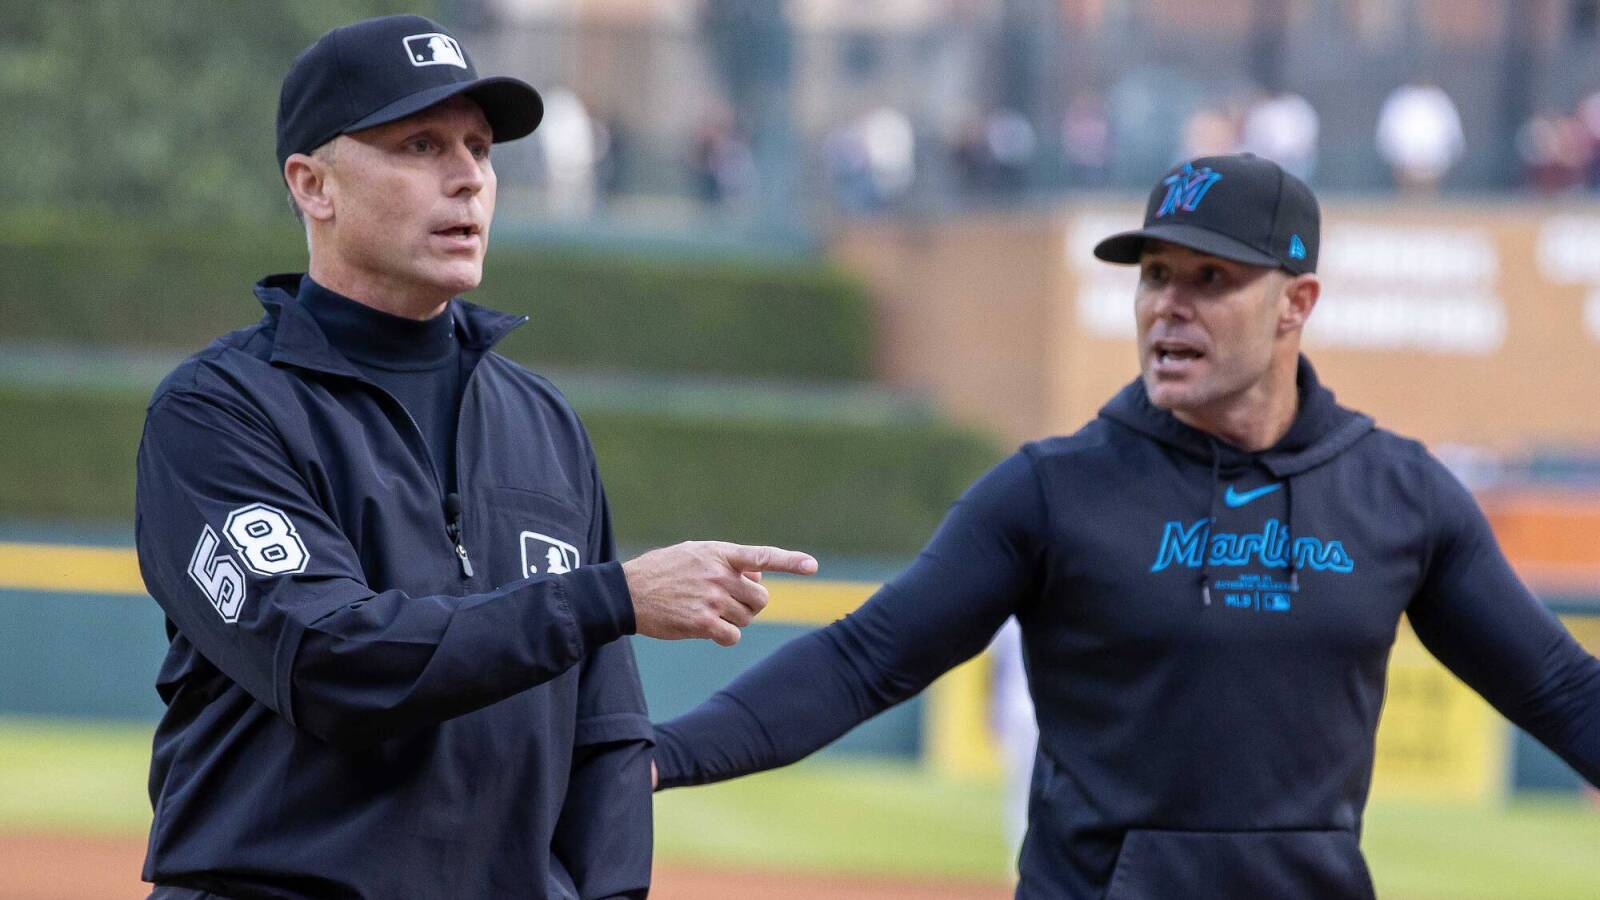 Watch: Marlins manager in disbelief after nearly being ejected